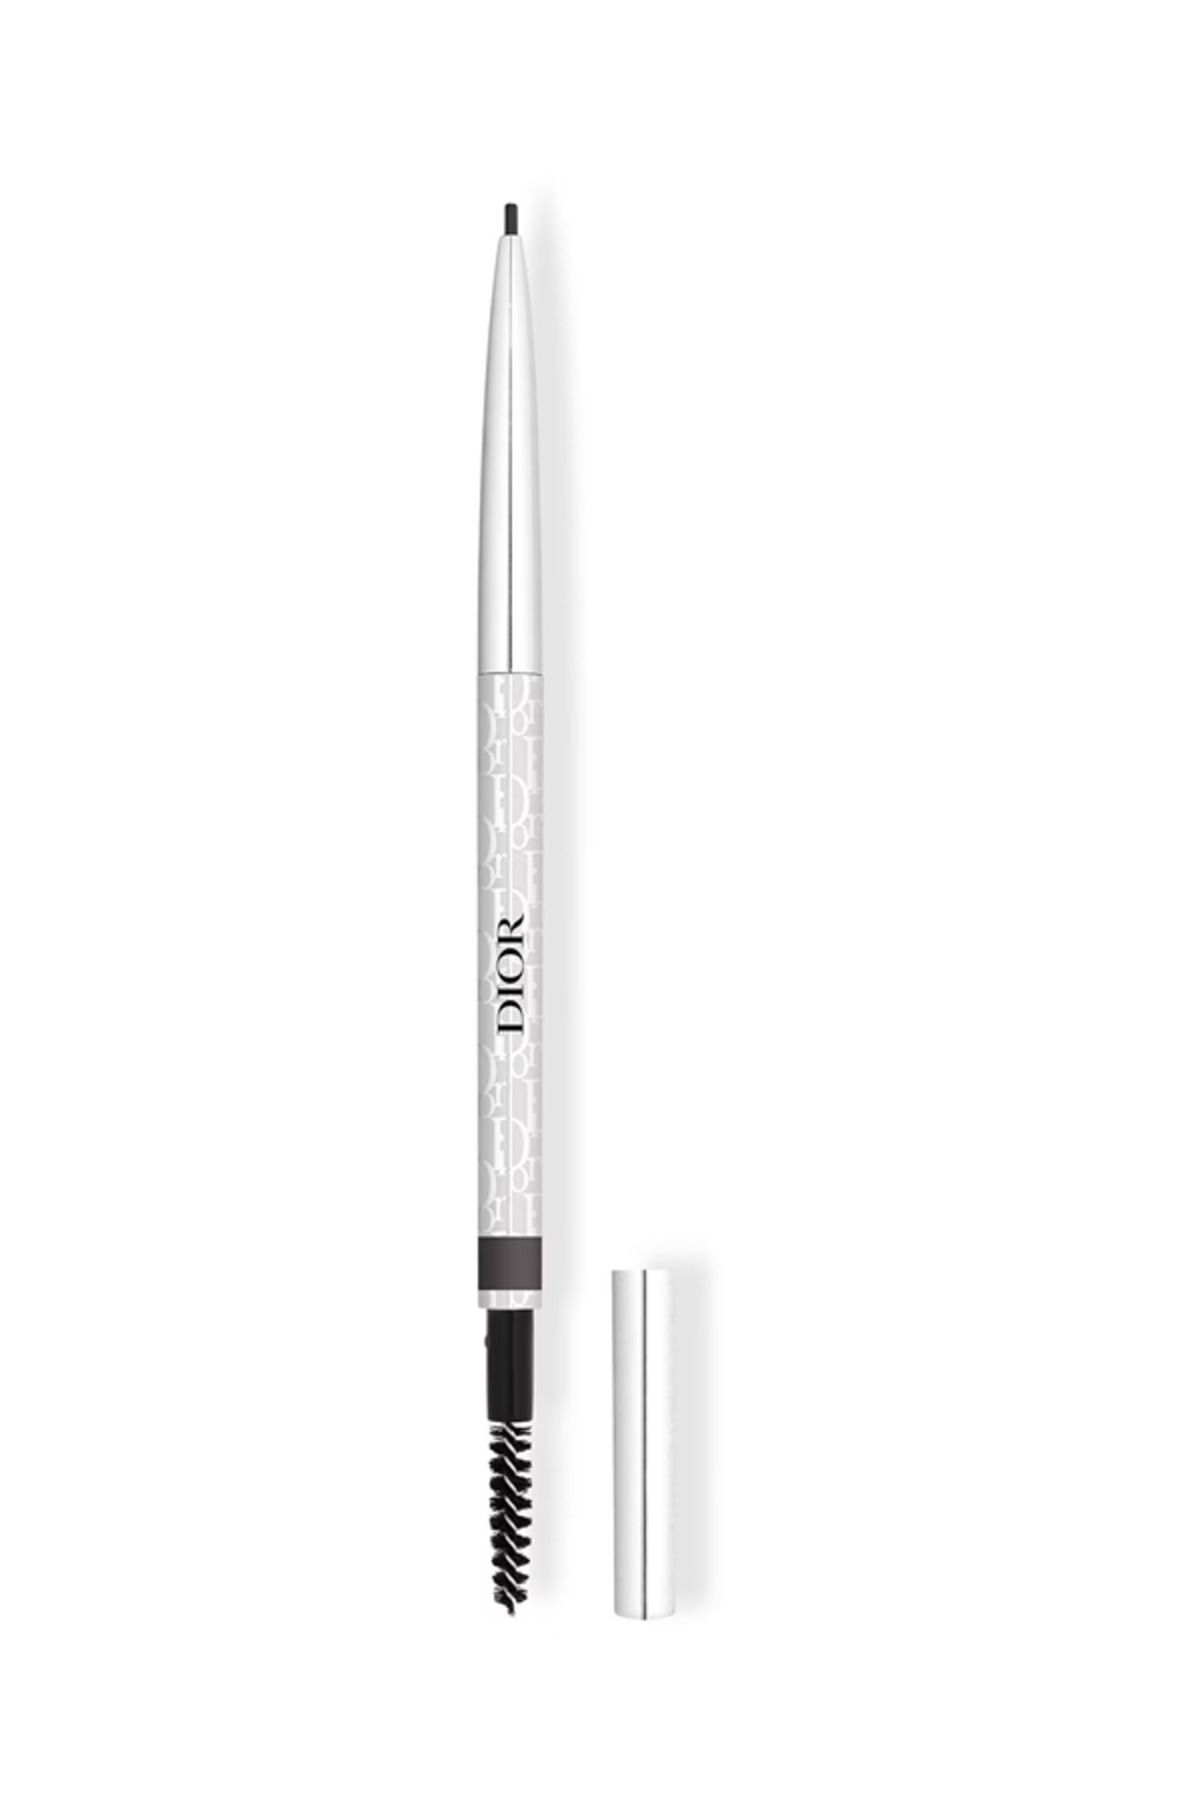 Dior DİORSHOW BROW STYLER - EYEBROW PENCİL THAT PLUMPS THE EYEBROWS PSSN2095